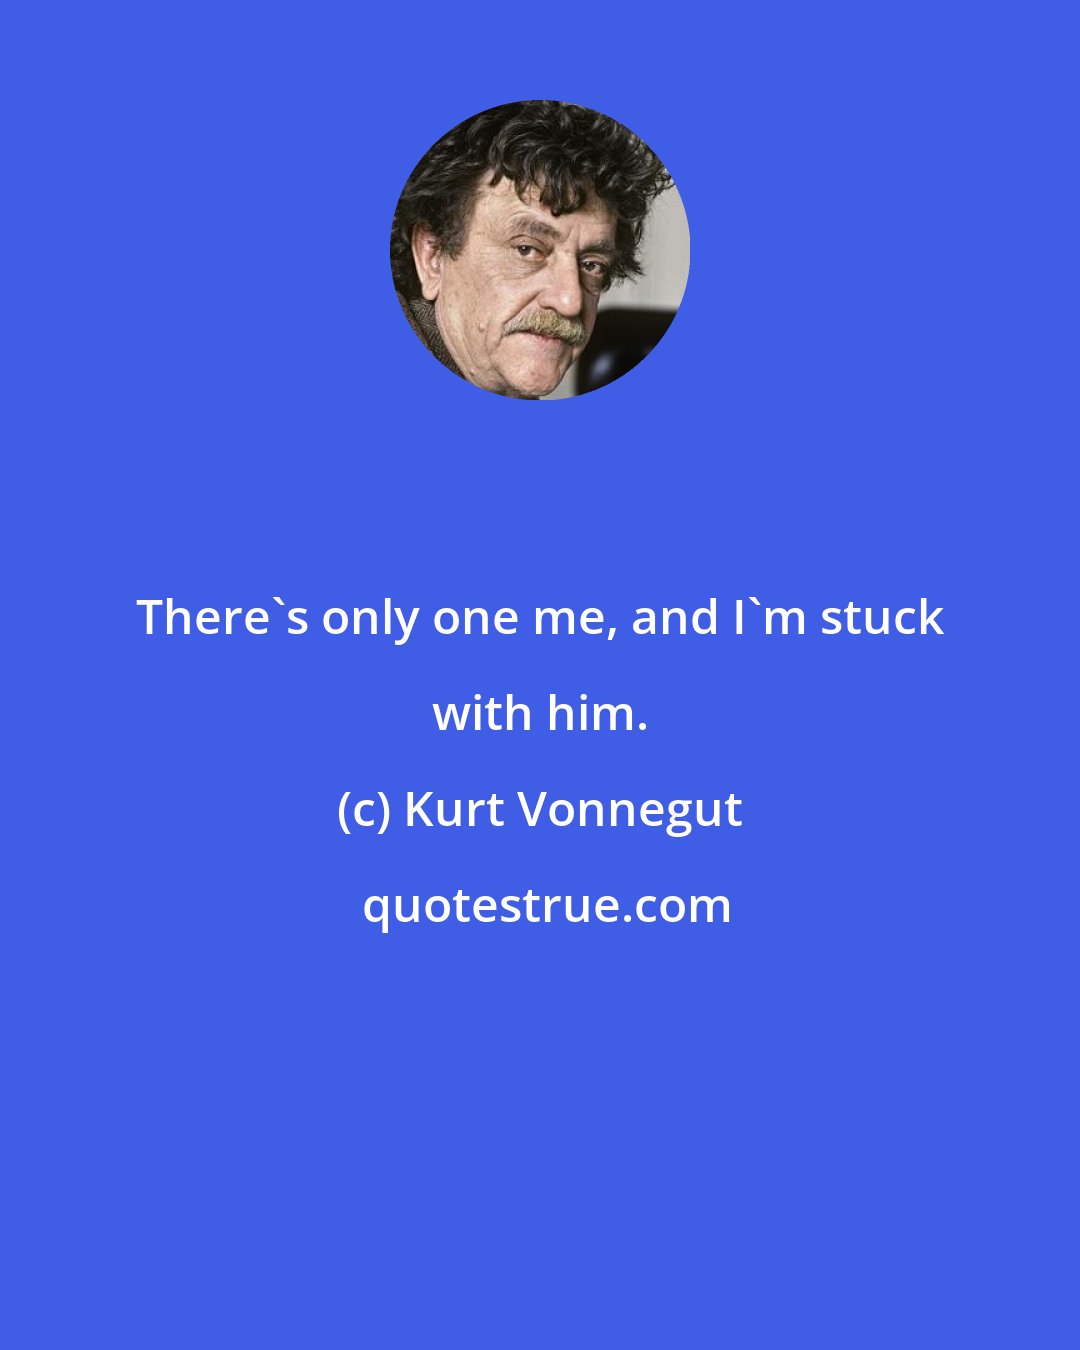 Kurt Vonnegut: There's only one me, and I'm stuck with him.